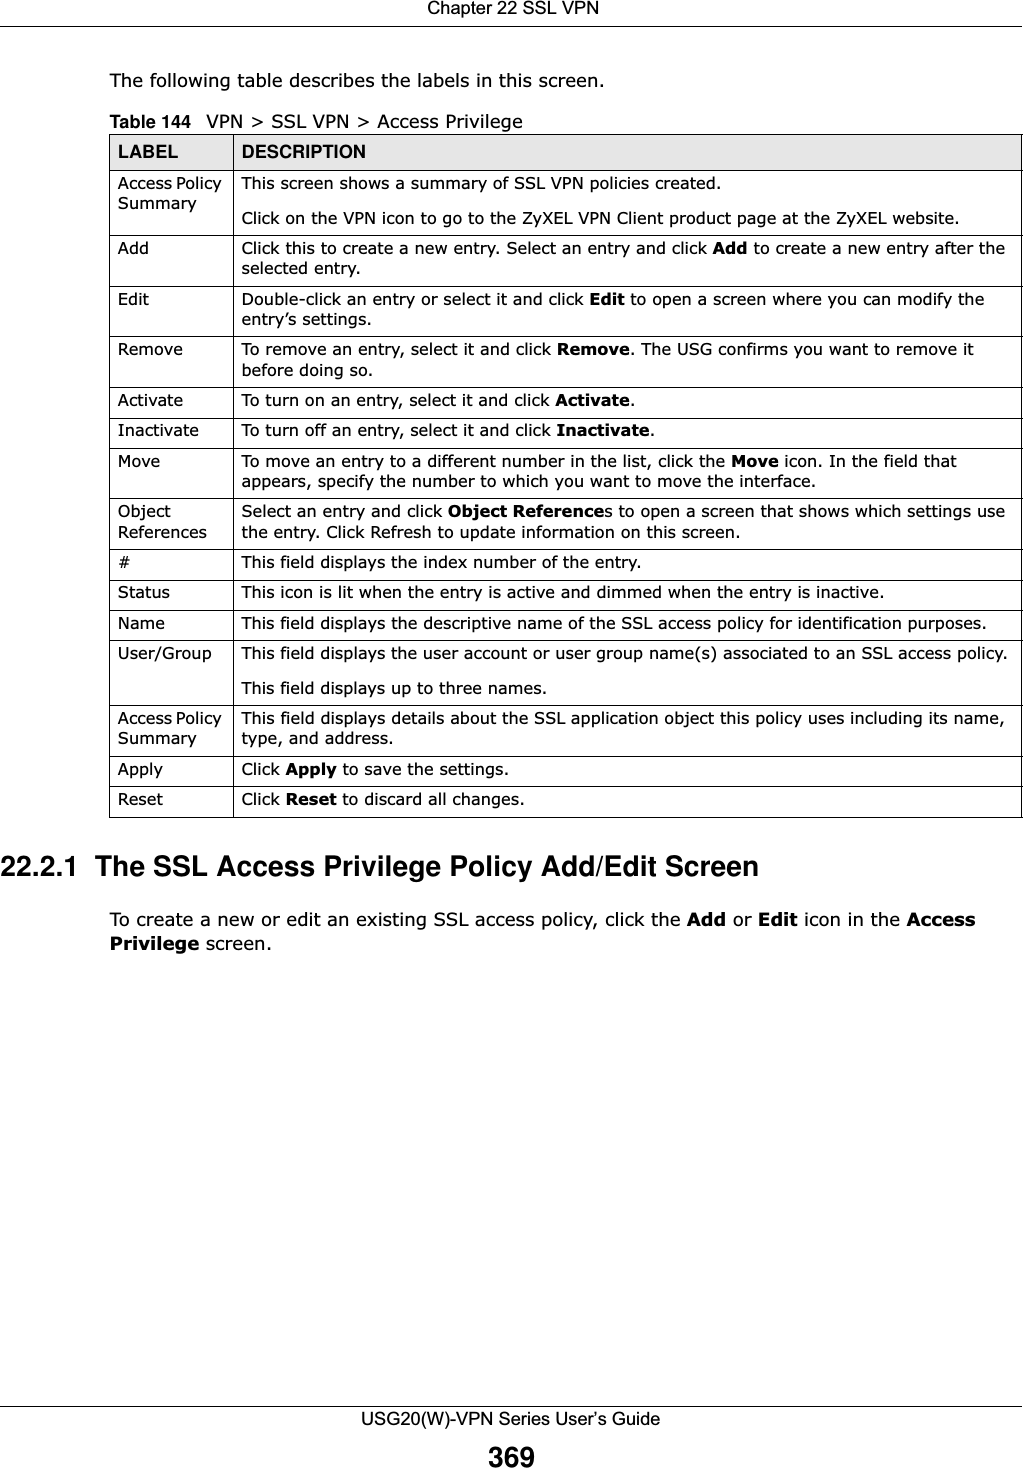  Chapter 22 SSL VPNUSG20(W)-VPN Series User’s Guide369The following table describes the labels in this screen. 22.2.1  The SSL Access Privilege Policy Add/Edit Screen To create a new or edit an existing SSL access policy, click the Add or Edit icon in the AccessPrivilege screen. Table 144   VPN &gt; SSL VPN &gt; Access Privilege LABEL DESCRIPTIONAccess Policy SummaryThis screen shows a summary of SSL VPN policies created. Click on the VPN icon to go to the ZyXEL VPN Client product page at the ZyXEL website.Add Click this to create a new entry. Select an entry and click Add to create a new entry after the selected entry.Edit Double-click an entry or select it and click Edit to open a screen where you can modify the entry’s settings. Remove To remove an entry, select it and click Remove. The USG confirms you want to remove it before doing so.Activate To turn on an entry, select it and click Activate.Inactivate To turn off an entry, select it and click Inactivate.Move To move an entry to a different number in the list, click the Move icon. In the field that appears, specify the number to which you want to move the interface.Object ReferencesSelect an entry and click Object References to open a screen that shows which settings use the entry. Click Refresh to update information on this screen.# This field displays the index number of the entry. Status This icon is lit when the entry is active and dimmed when the entry is inactive.Name This field displays the descriptive name of the SSL access policy for identification purposes. User/Group This field displays the user account or user group name(s) associated to an SSL access policy. This field displays up to three names.  Access Policy SummaryThis field displays details about the SSL application object this policy uses including its name, type, and address.Apply Click Apply to save the settings. Reset Click Reset to discard all changes. 